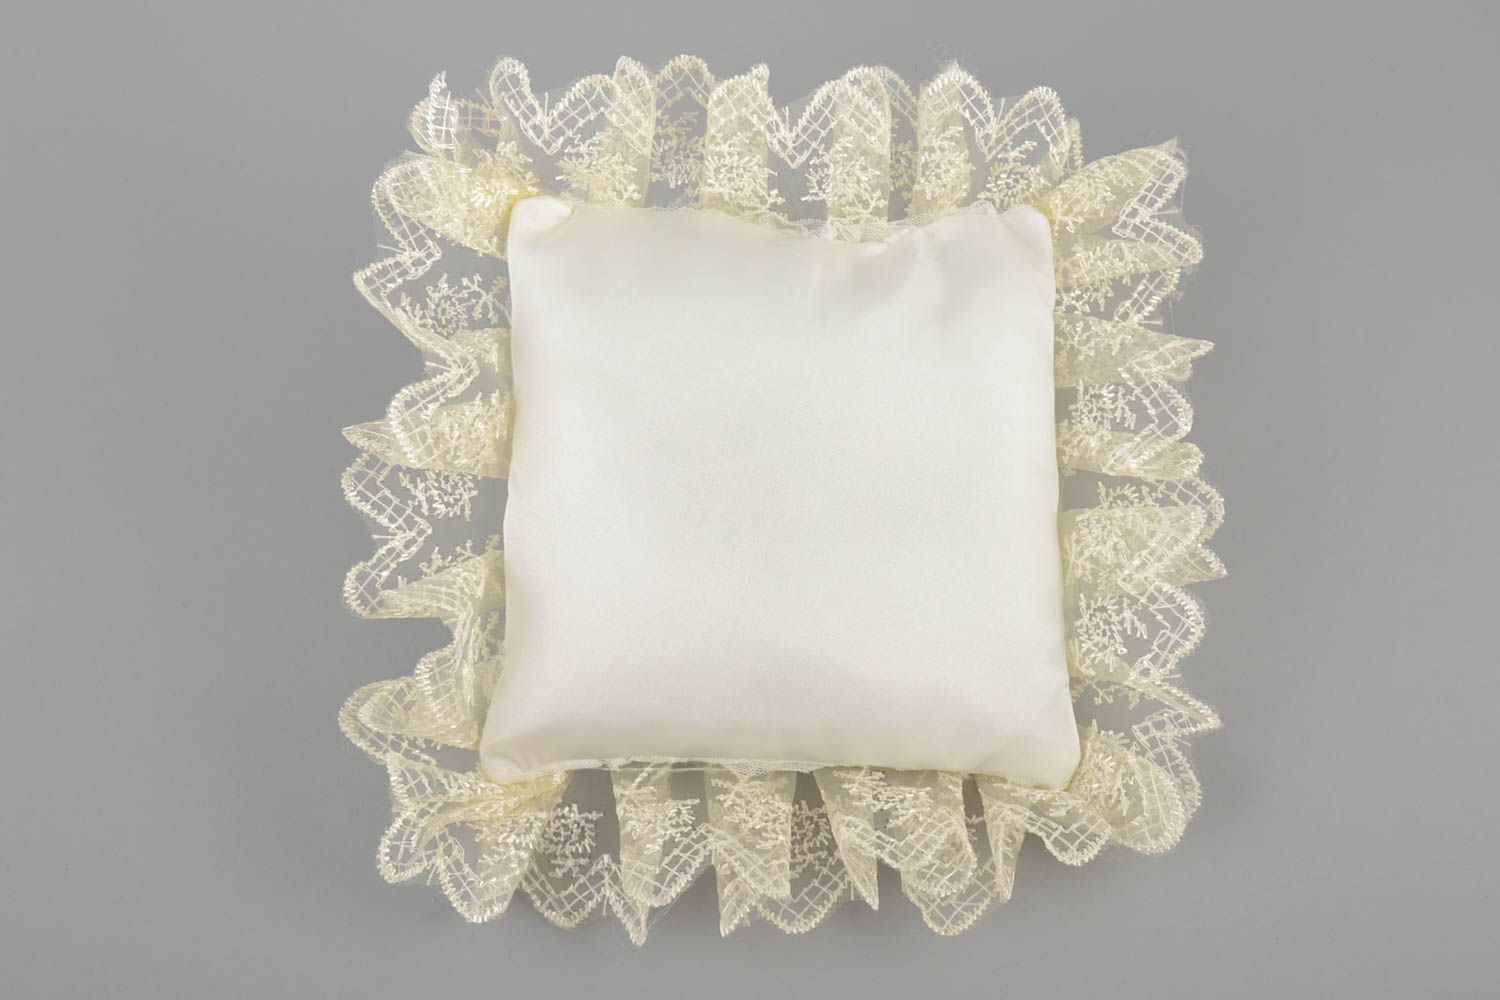 Handmade decorative fabric ring pillow with cream lace and artificial flowers photo 3